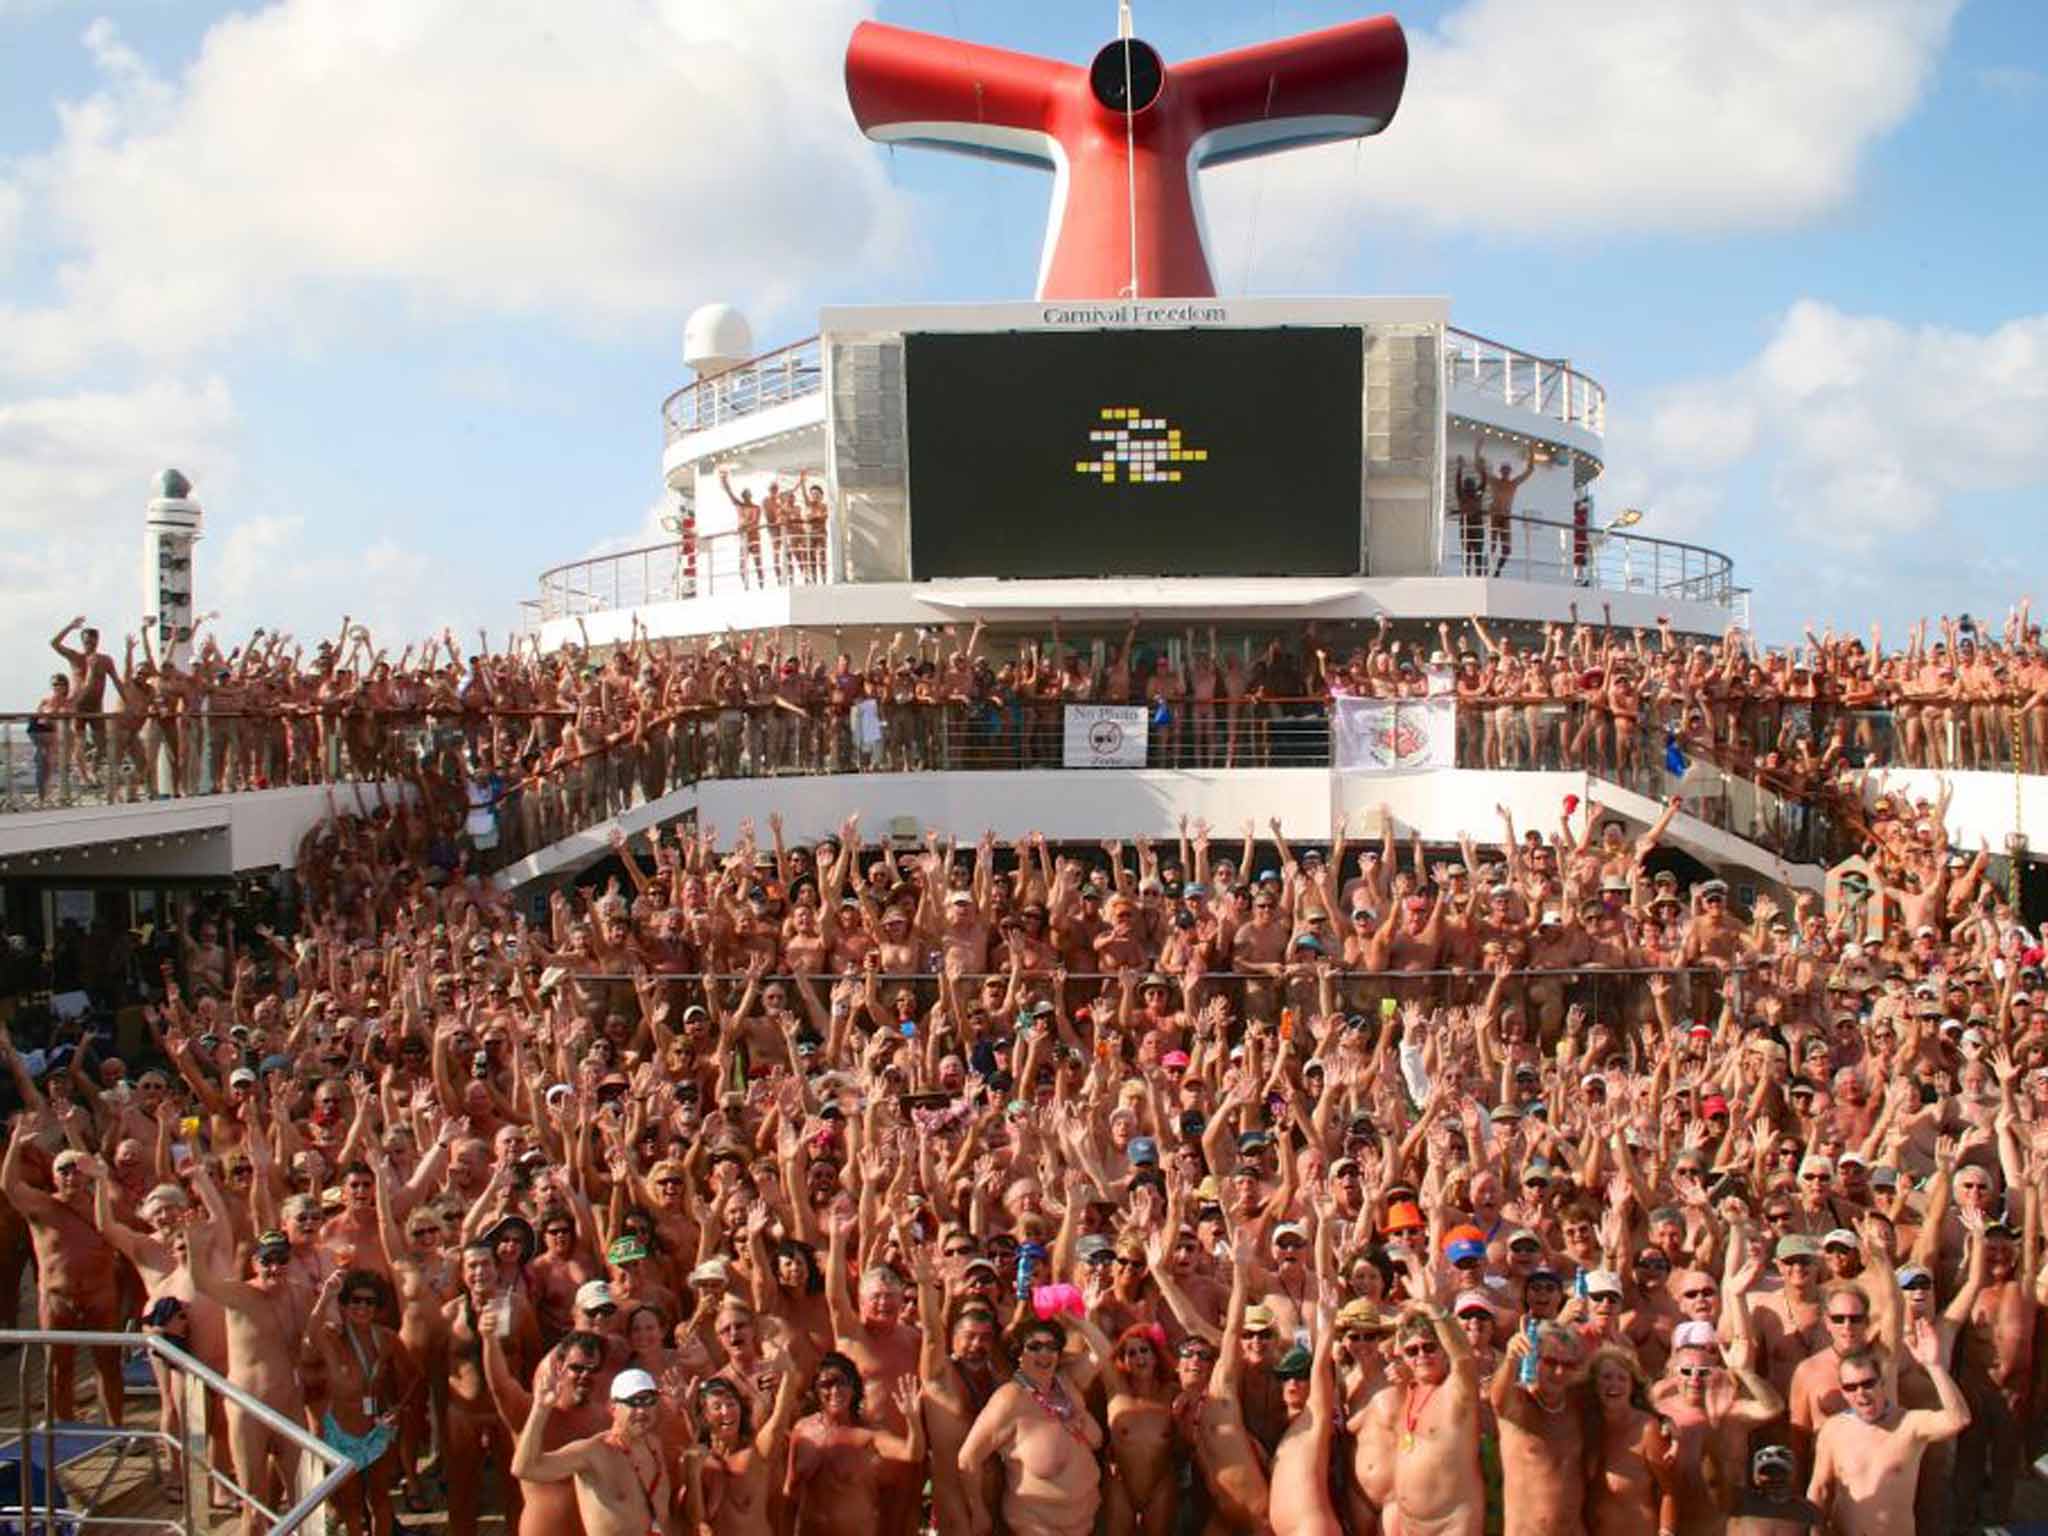 Nudist cruise ship Whats it like on a boat with 2,000 people not wearing clothes? The Independent The Independent pic